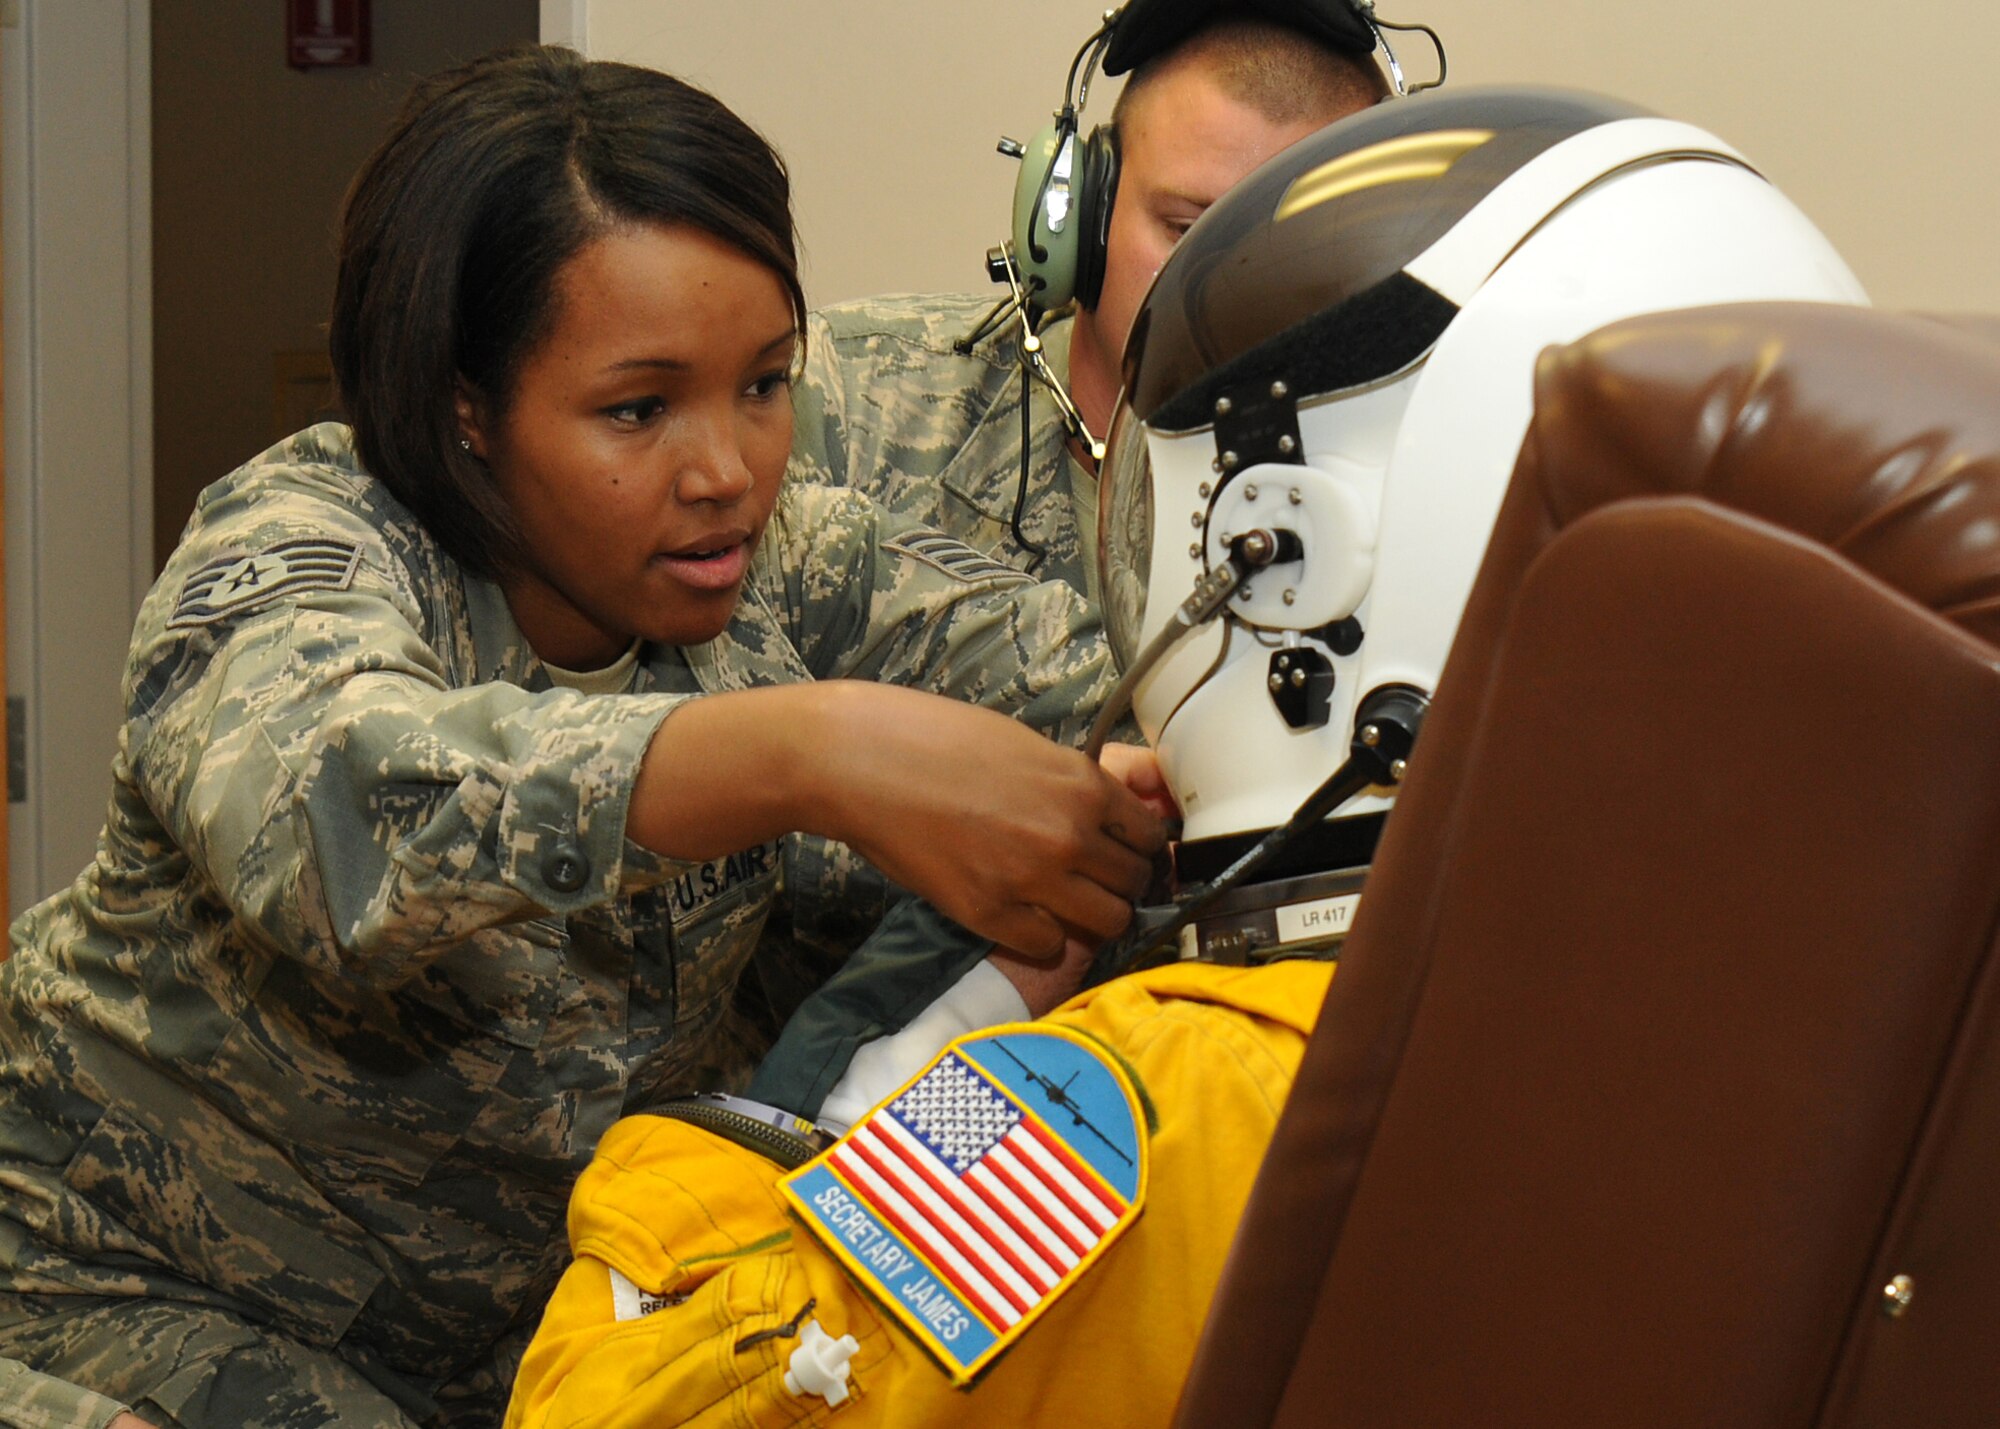 Staff Sgt. Virgie Yi, 9th Physiological Support Squadron assistant non-commissioned officer in charge of launch and recovery, adjusts the helmet for the high-altitude pressure suit of Secretary of the Air Force Deborah Lee James at Beale Air Force Base, California, Aug. 11, 2015. The specialized pressure suit allows U-2 Dragon Lady pilots to safely fly at altitudes reaching 70,000 feet. James visited Beale to receive a first-hand perspective of high-altitude intelligence, surveillance and reconnaissance from collection to dissemination. (U.S. Air Force photo by Senior Airman Dana J. Cable)